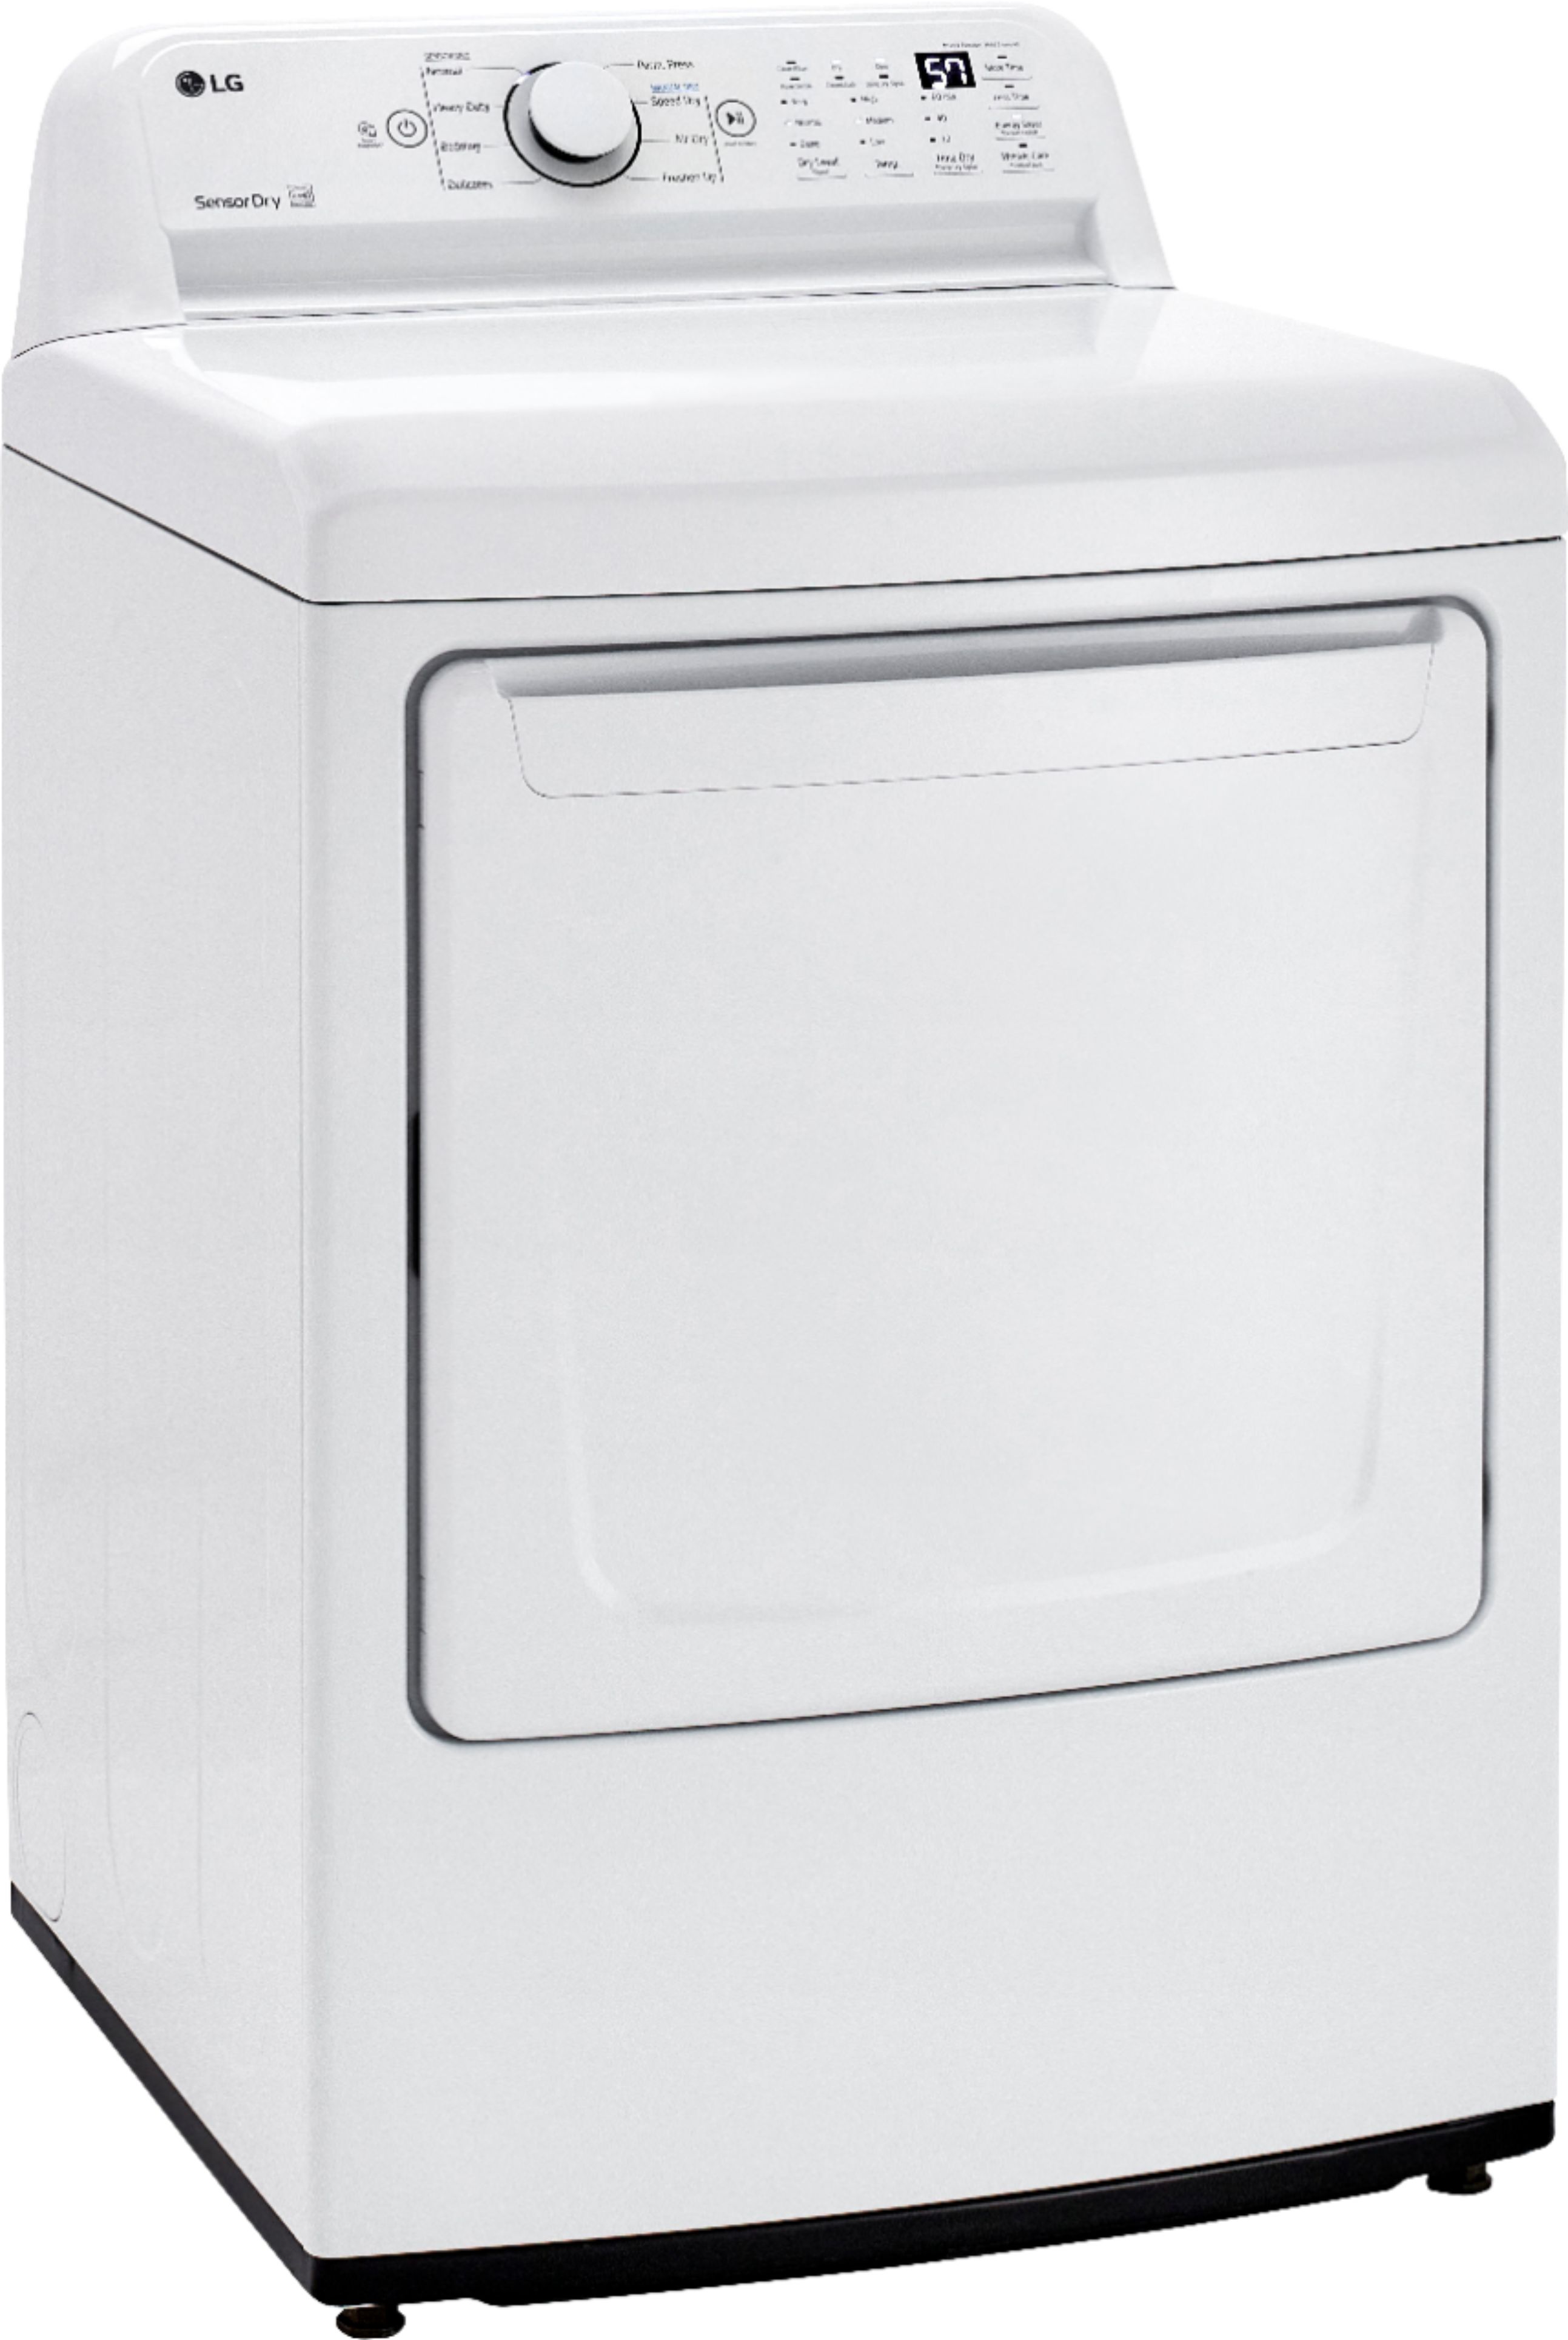 Angle View: LG - 7.3 Cu. Ft. Gas Dryer with Sensor Dry - White